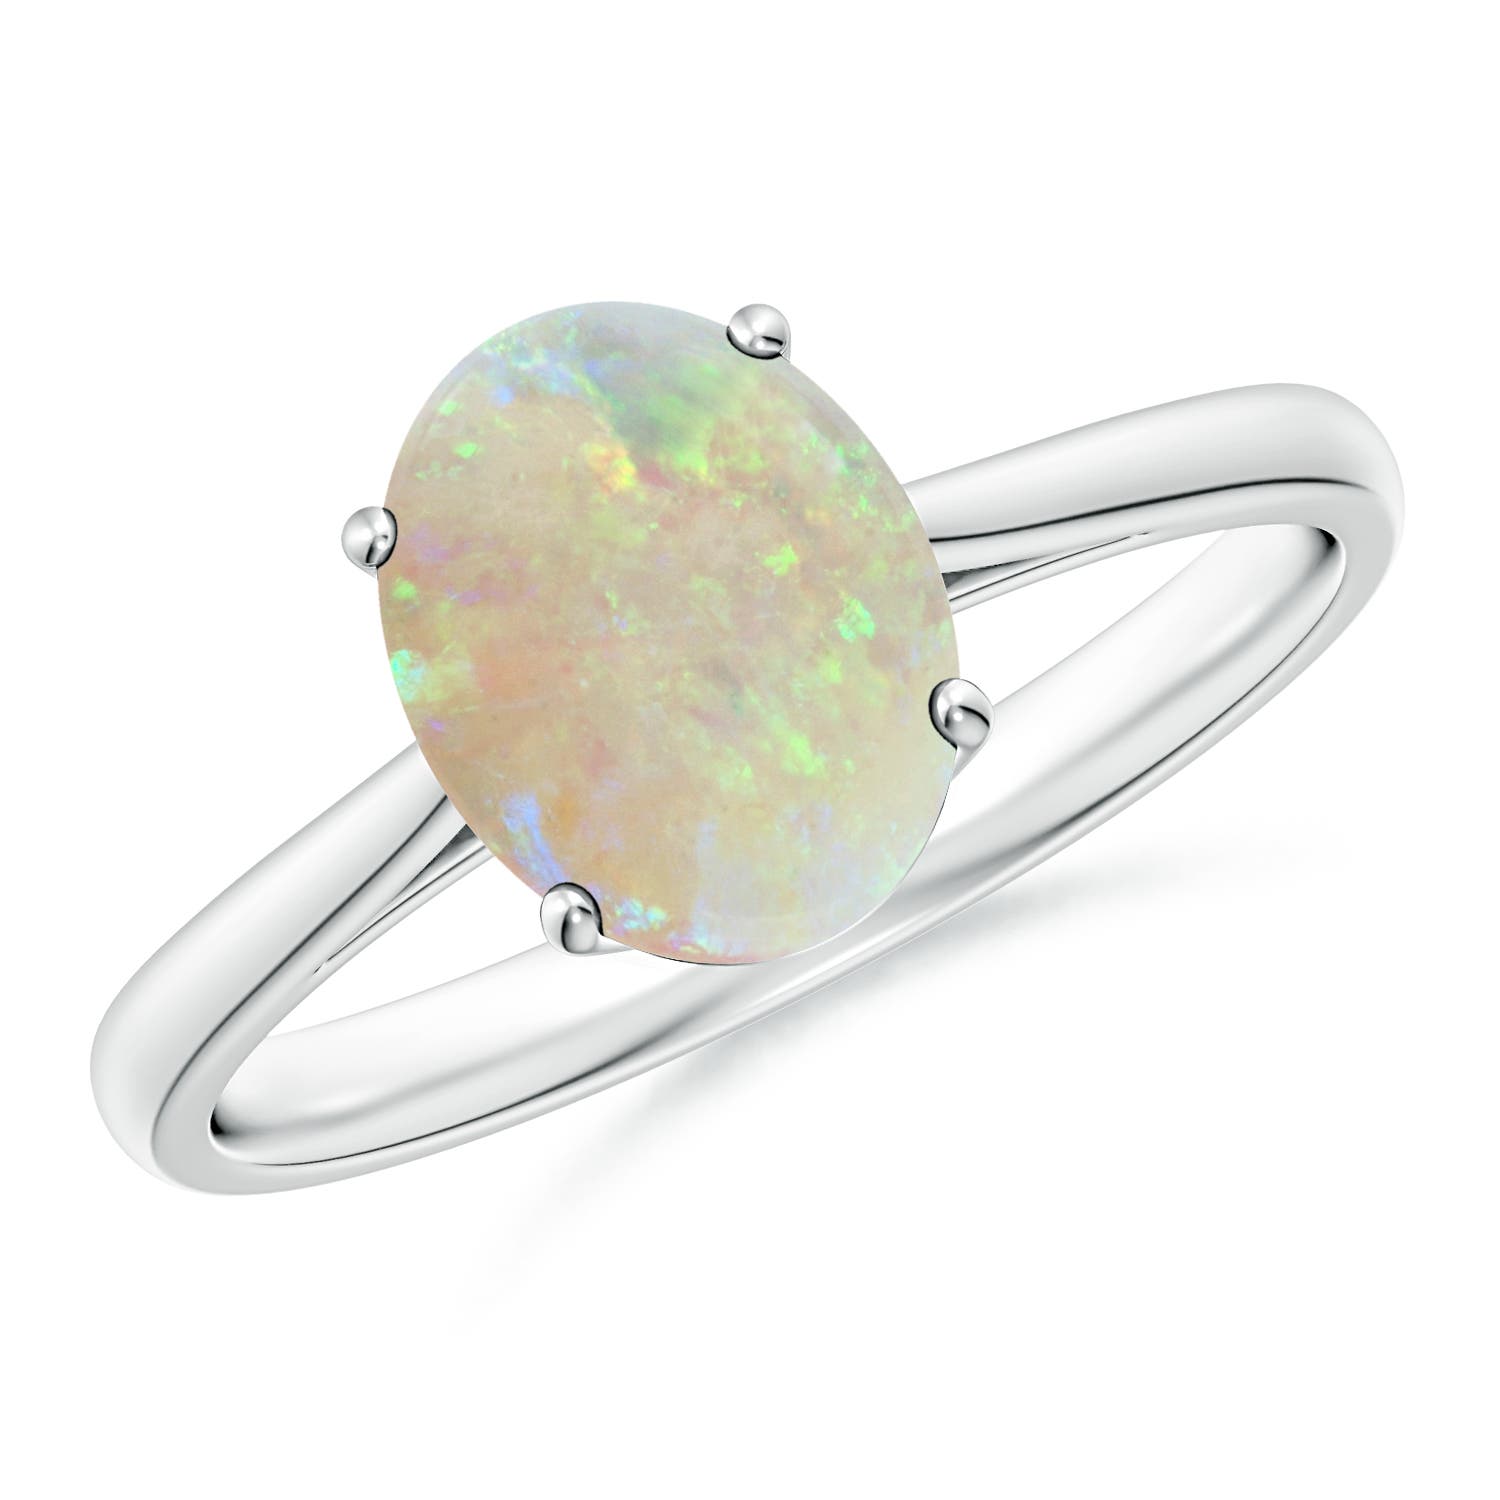 AAA - Opal / 1.1 CT / 14 KT White Gold